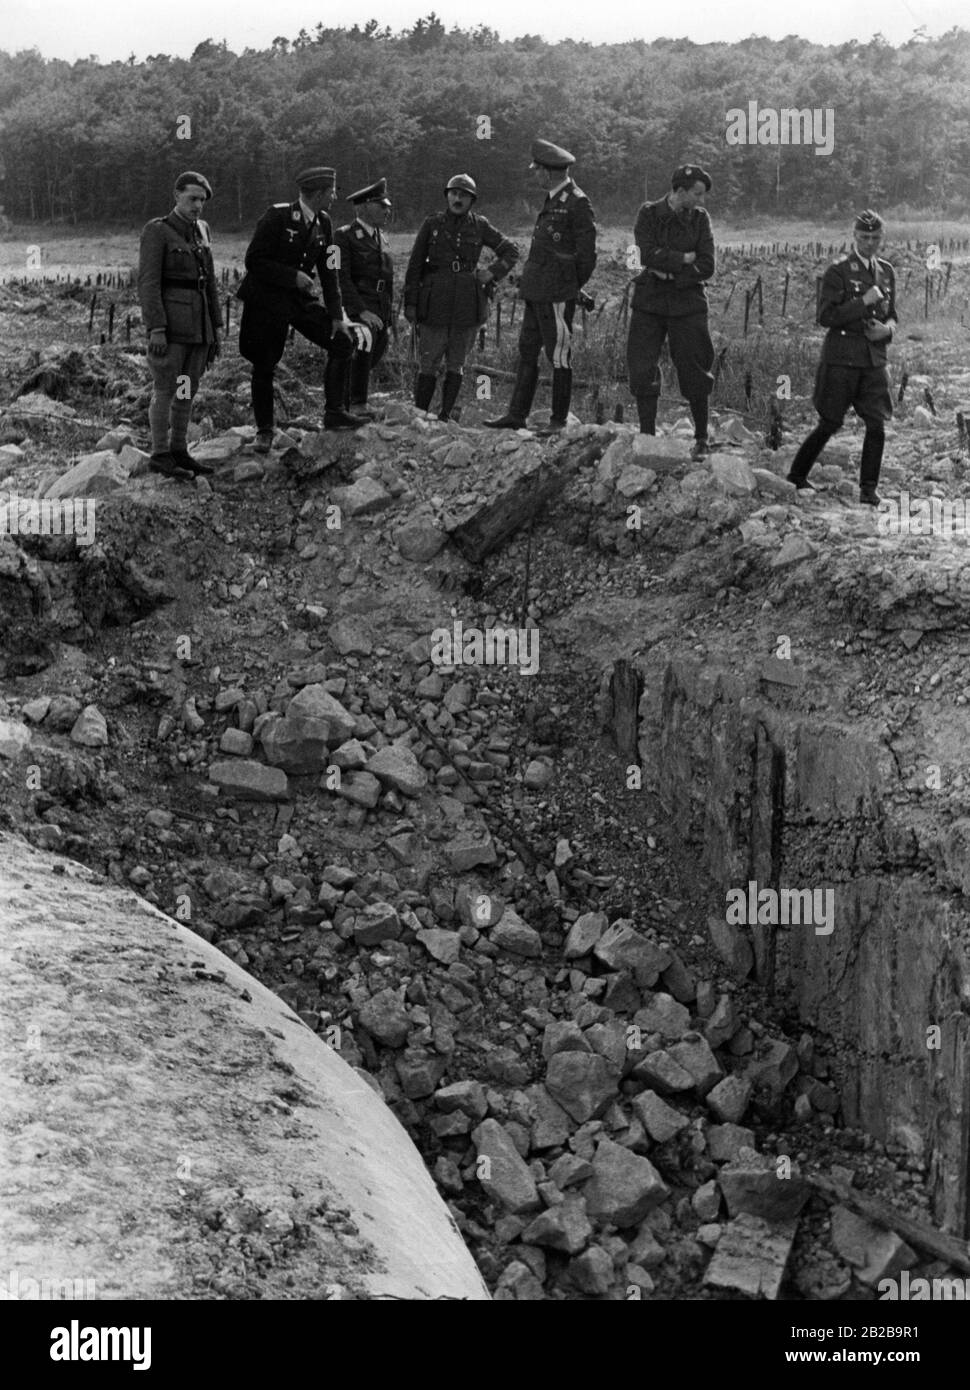 The French captain Emy ( middle) with other French officers and a group of German Luftwaffe officers inspecting damage caused by a Stuka attack on fortifications of the Maginot Line. On his left, the German General Zander. Stock Photo